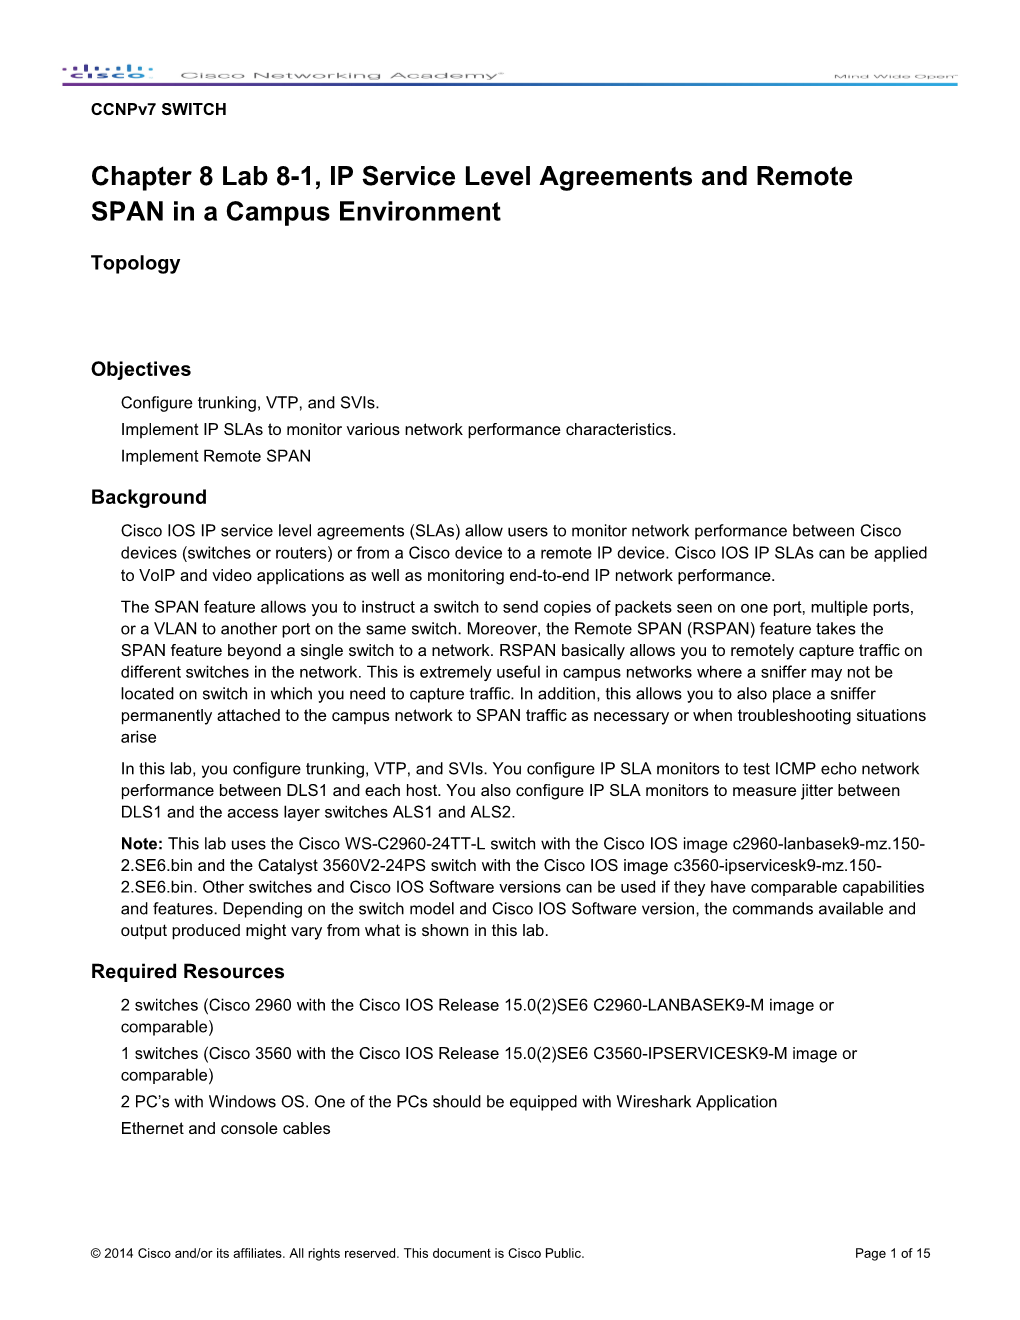 Ccnpv7 SWITCH Chapter 8 Lab 8-1, IP Service Level Agreements and Remote Span in a Campus